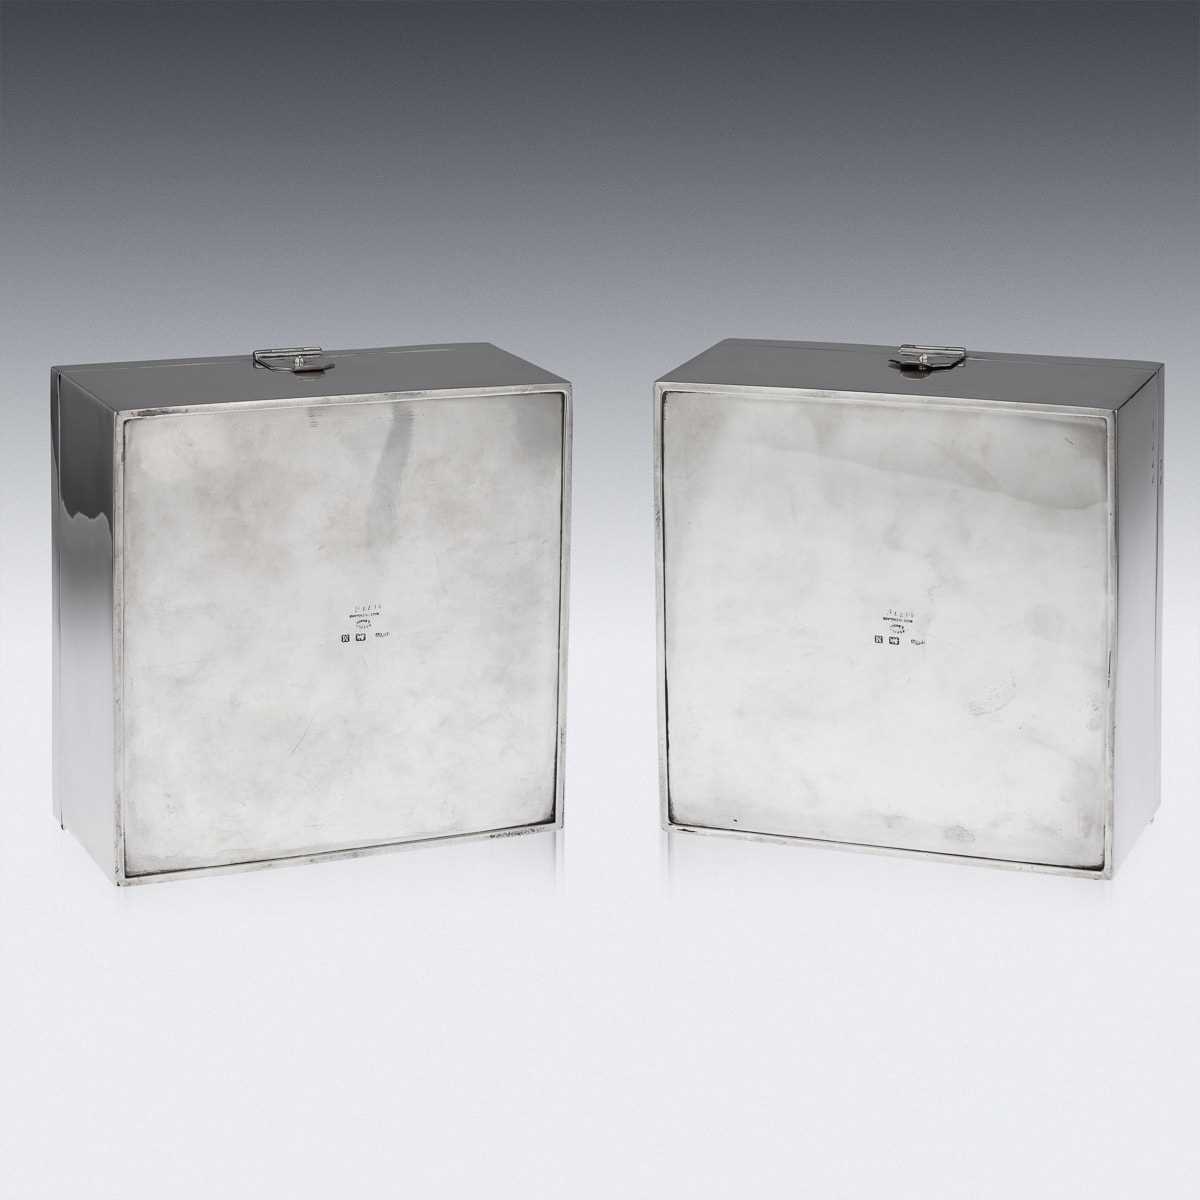 ASPREY & CO. : A PAIR OF STERLING SILVER ART DECO CIGAR BOXES, C. 1936 - Image 11 of 14